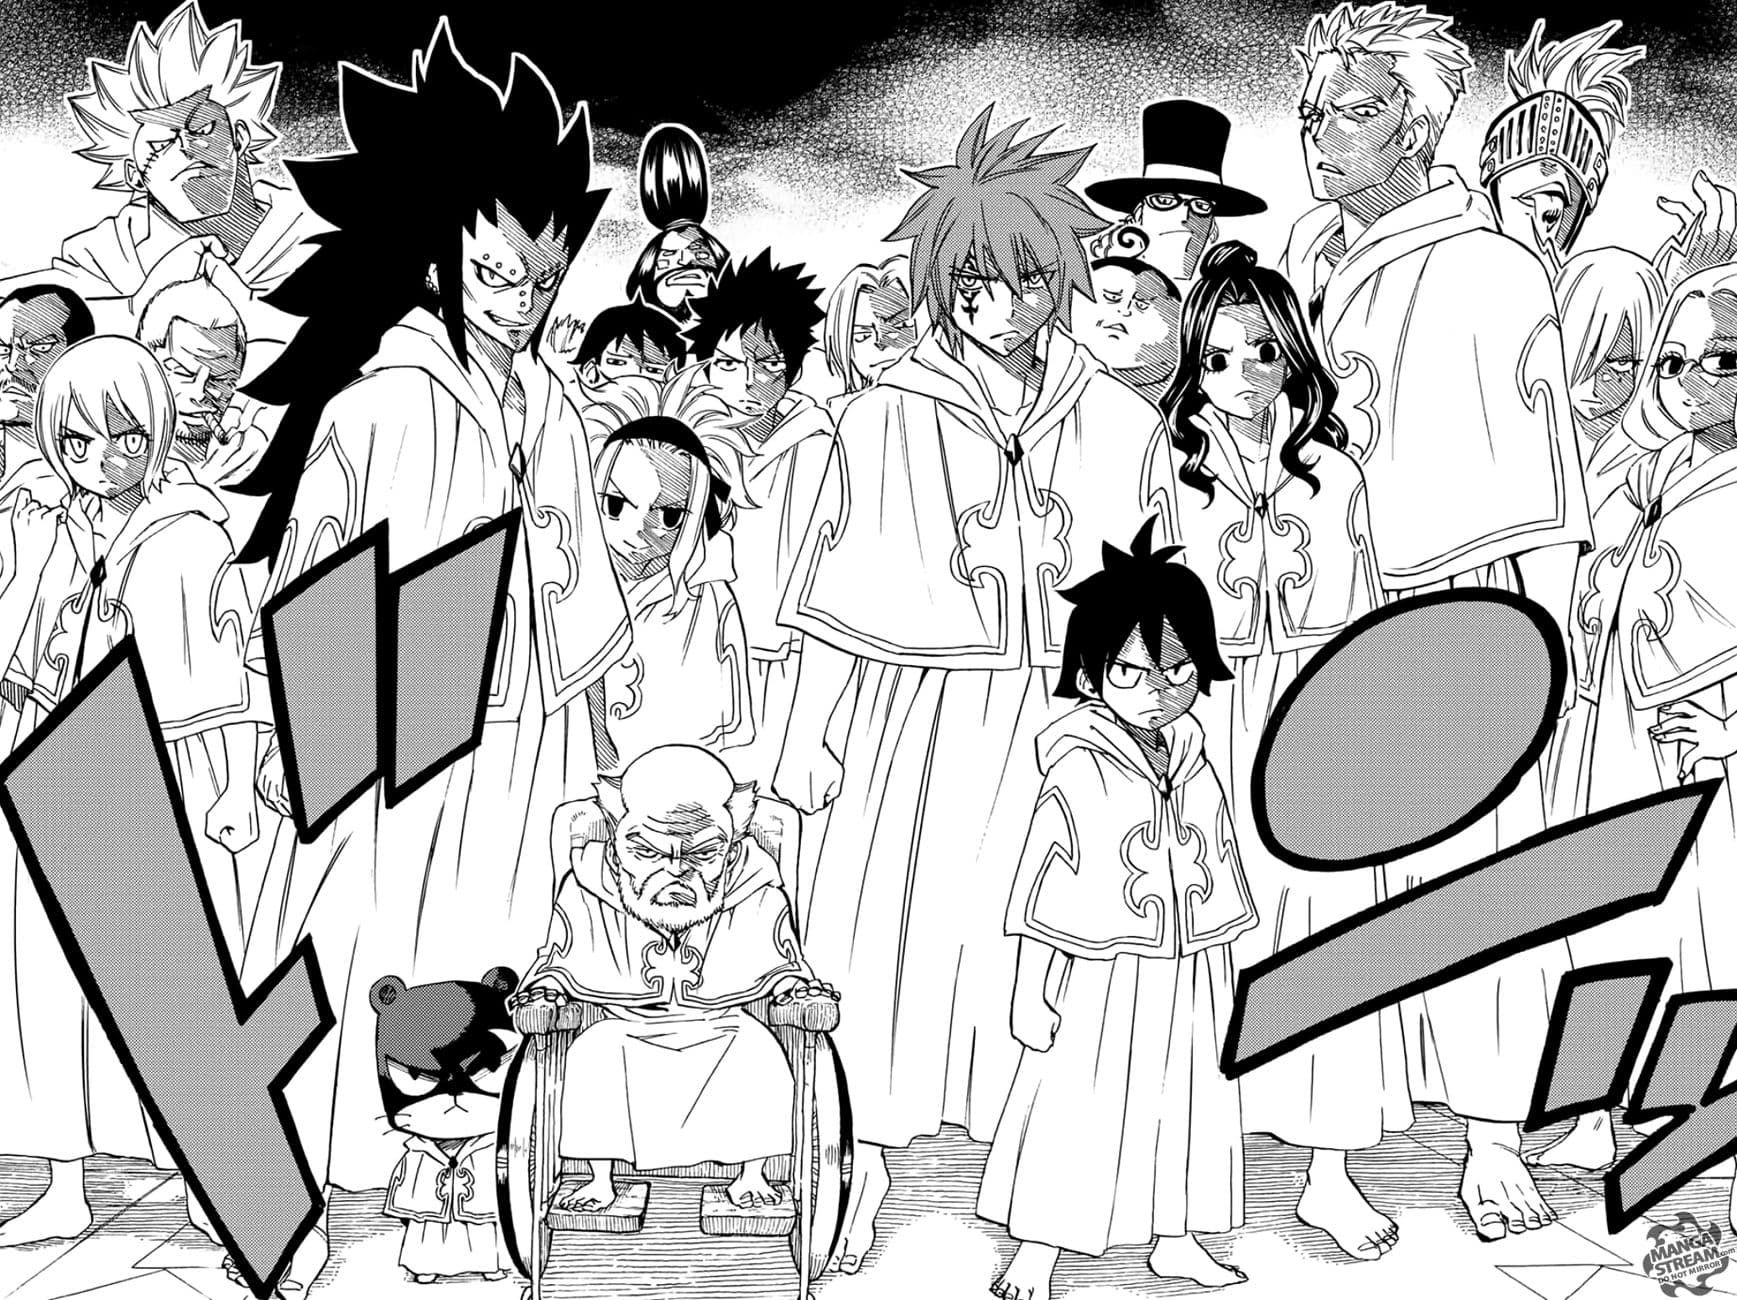 Fairy Tail: 100 Years Quest 28 TH